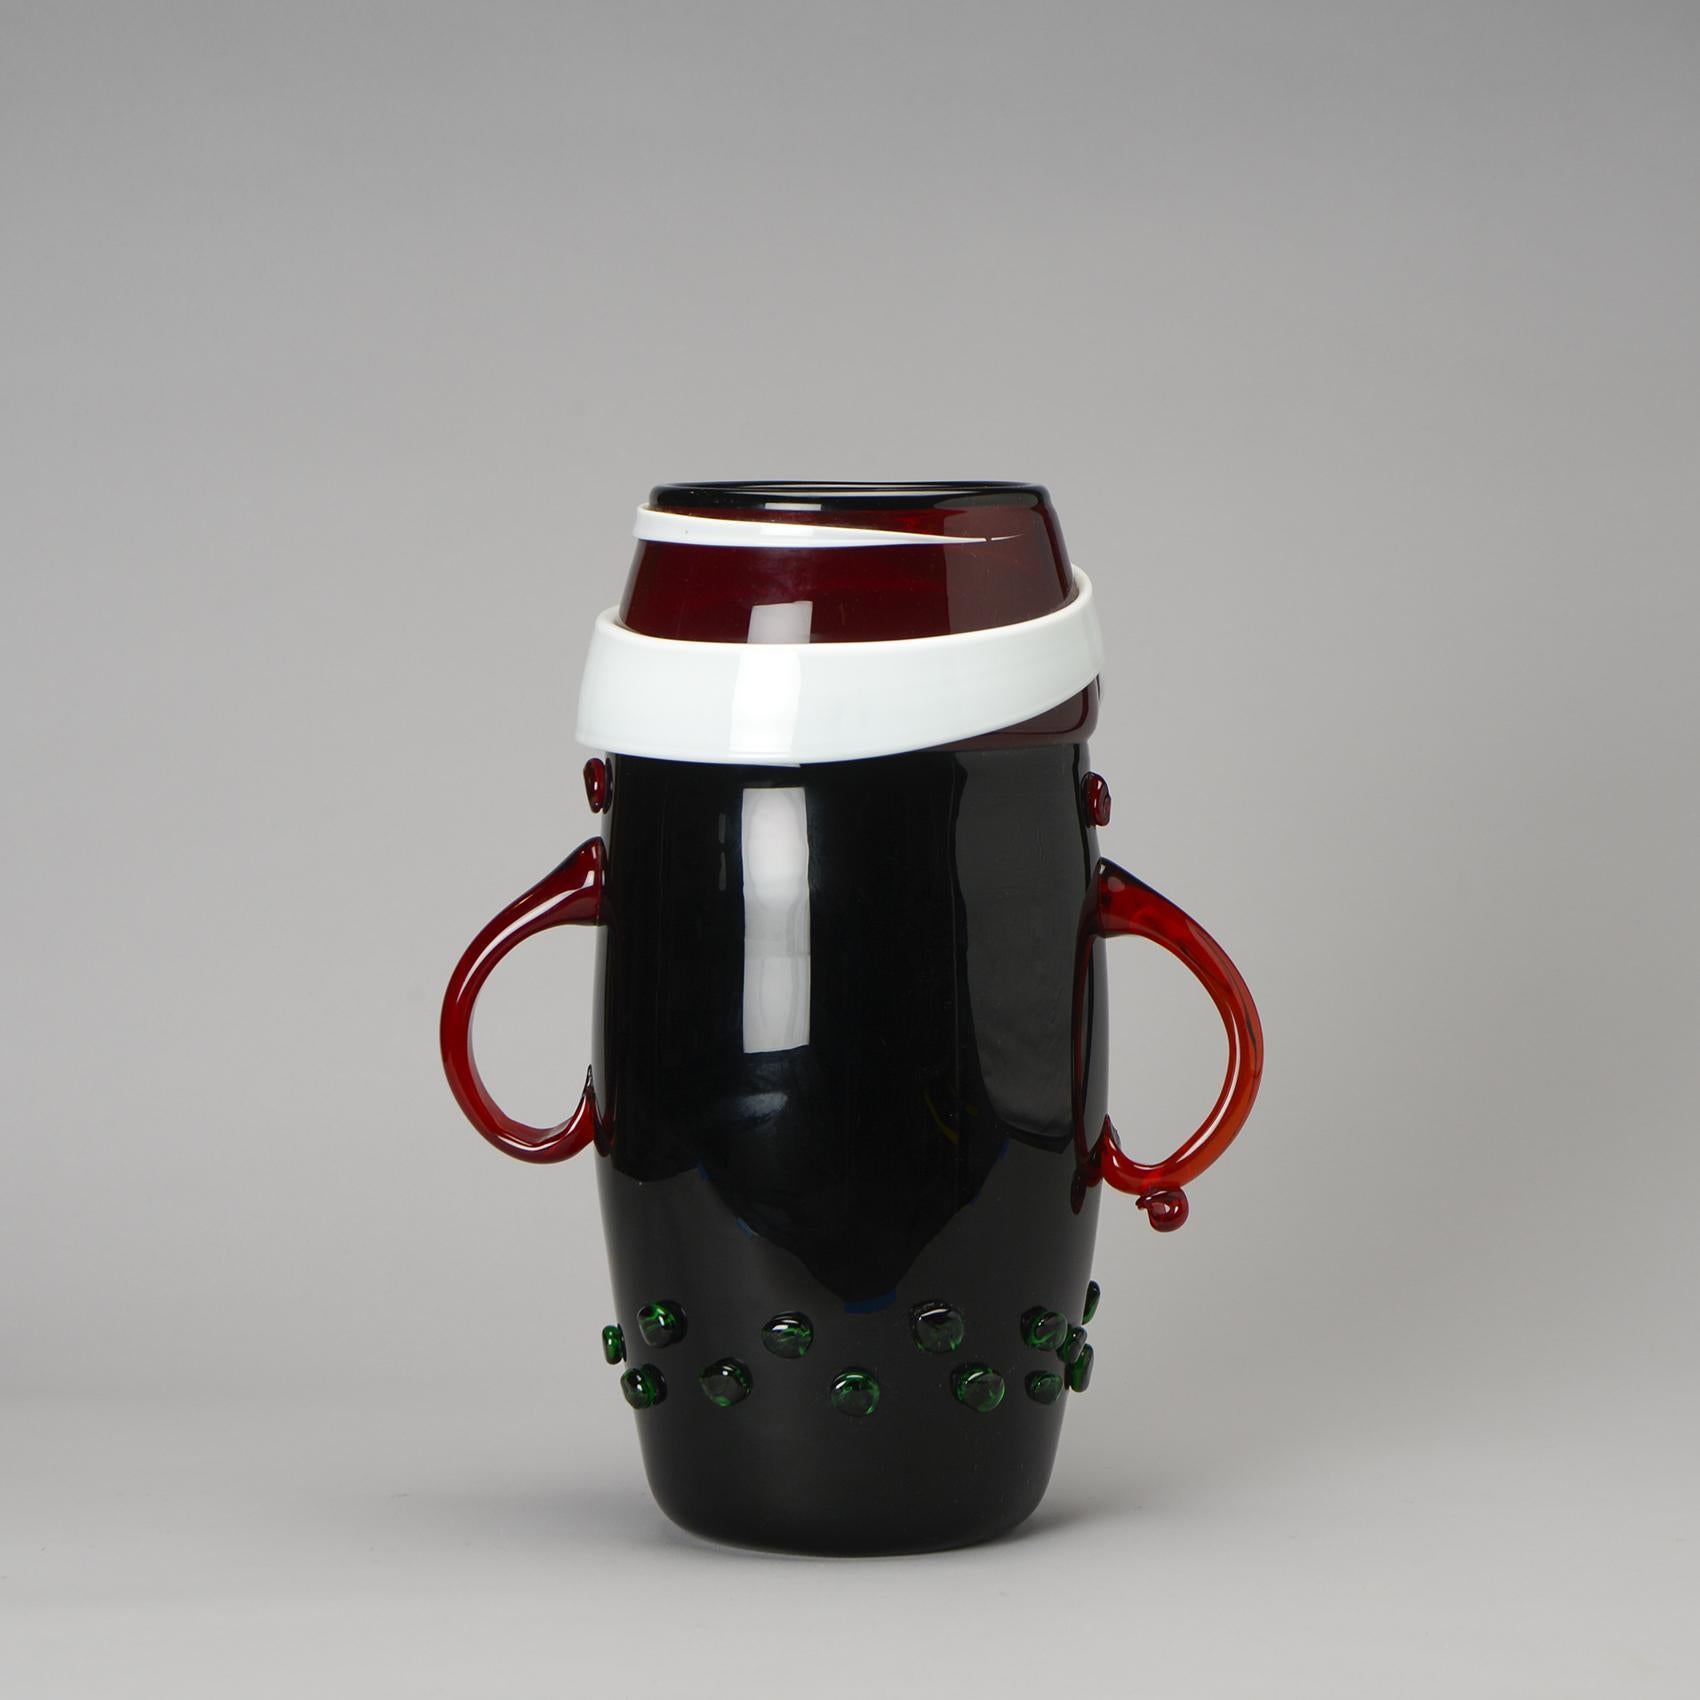 More than a simple decorative item, the grand vase model 8962 by Izzika GAON is a veritable work of art.

Crafted from blown polychrome glass, its oblong shape showcases a captivating design adorned with  green button appliques and two striking red